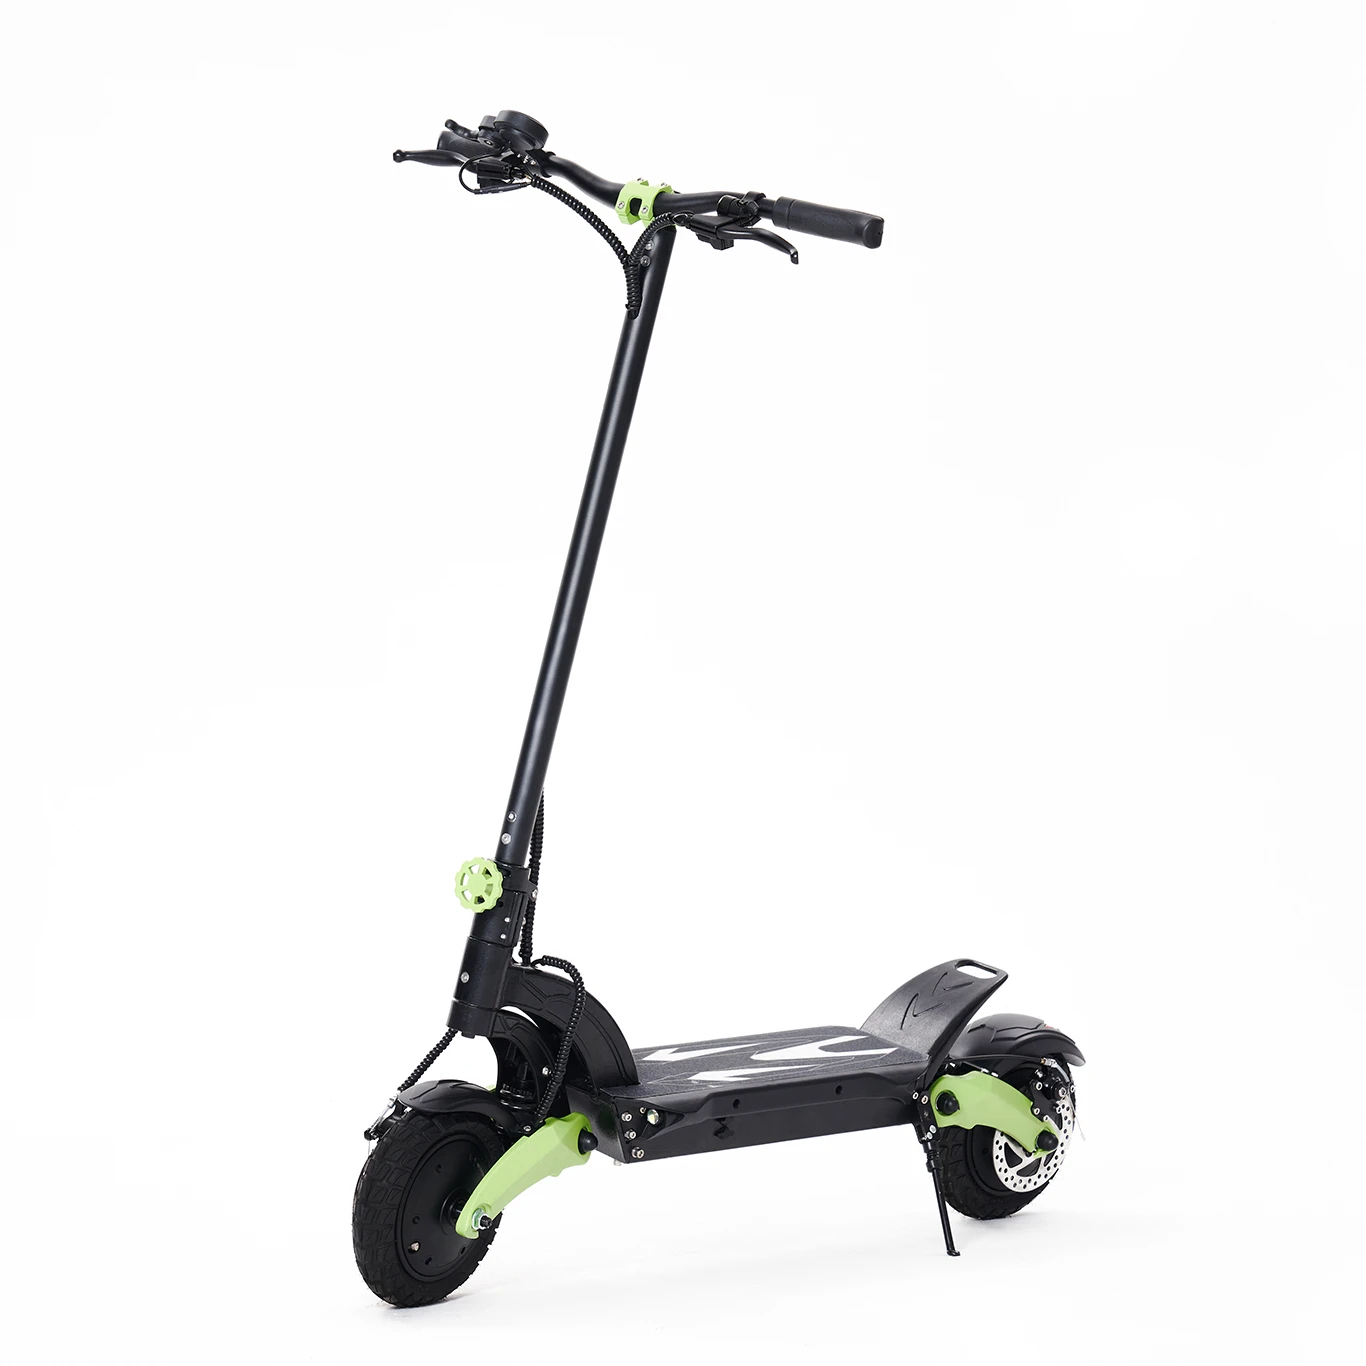 

European Warehouse Stock Self Balancing 1000W Citycoco Fat Wheel Electric Scooter, Customized color